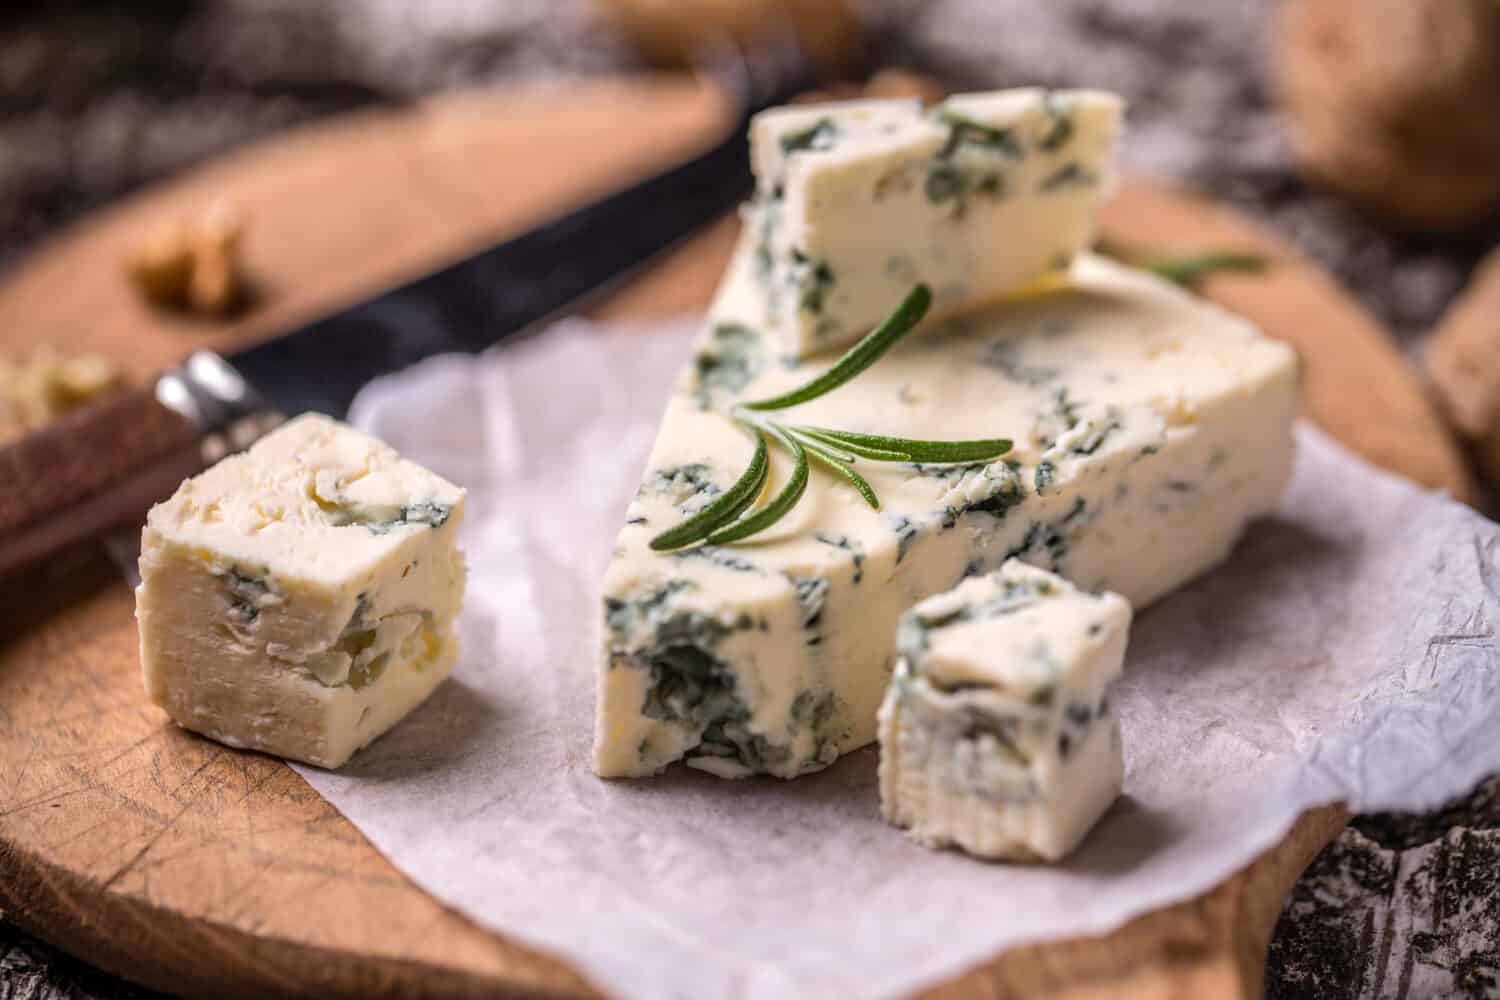 Slice of French Roquefort cheese with walnuts